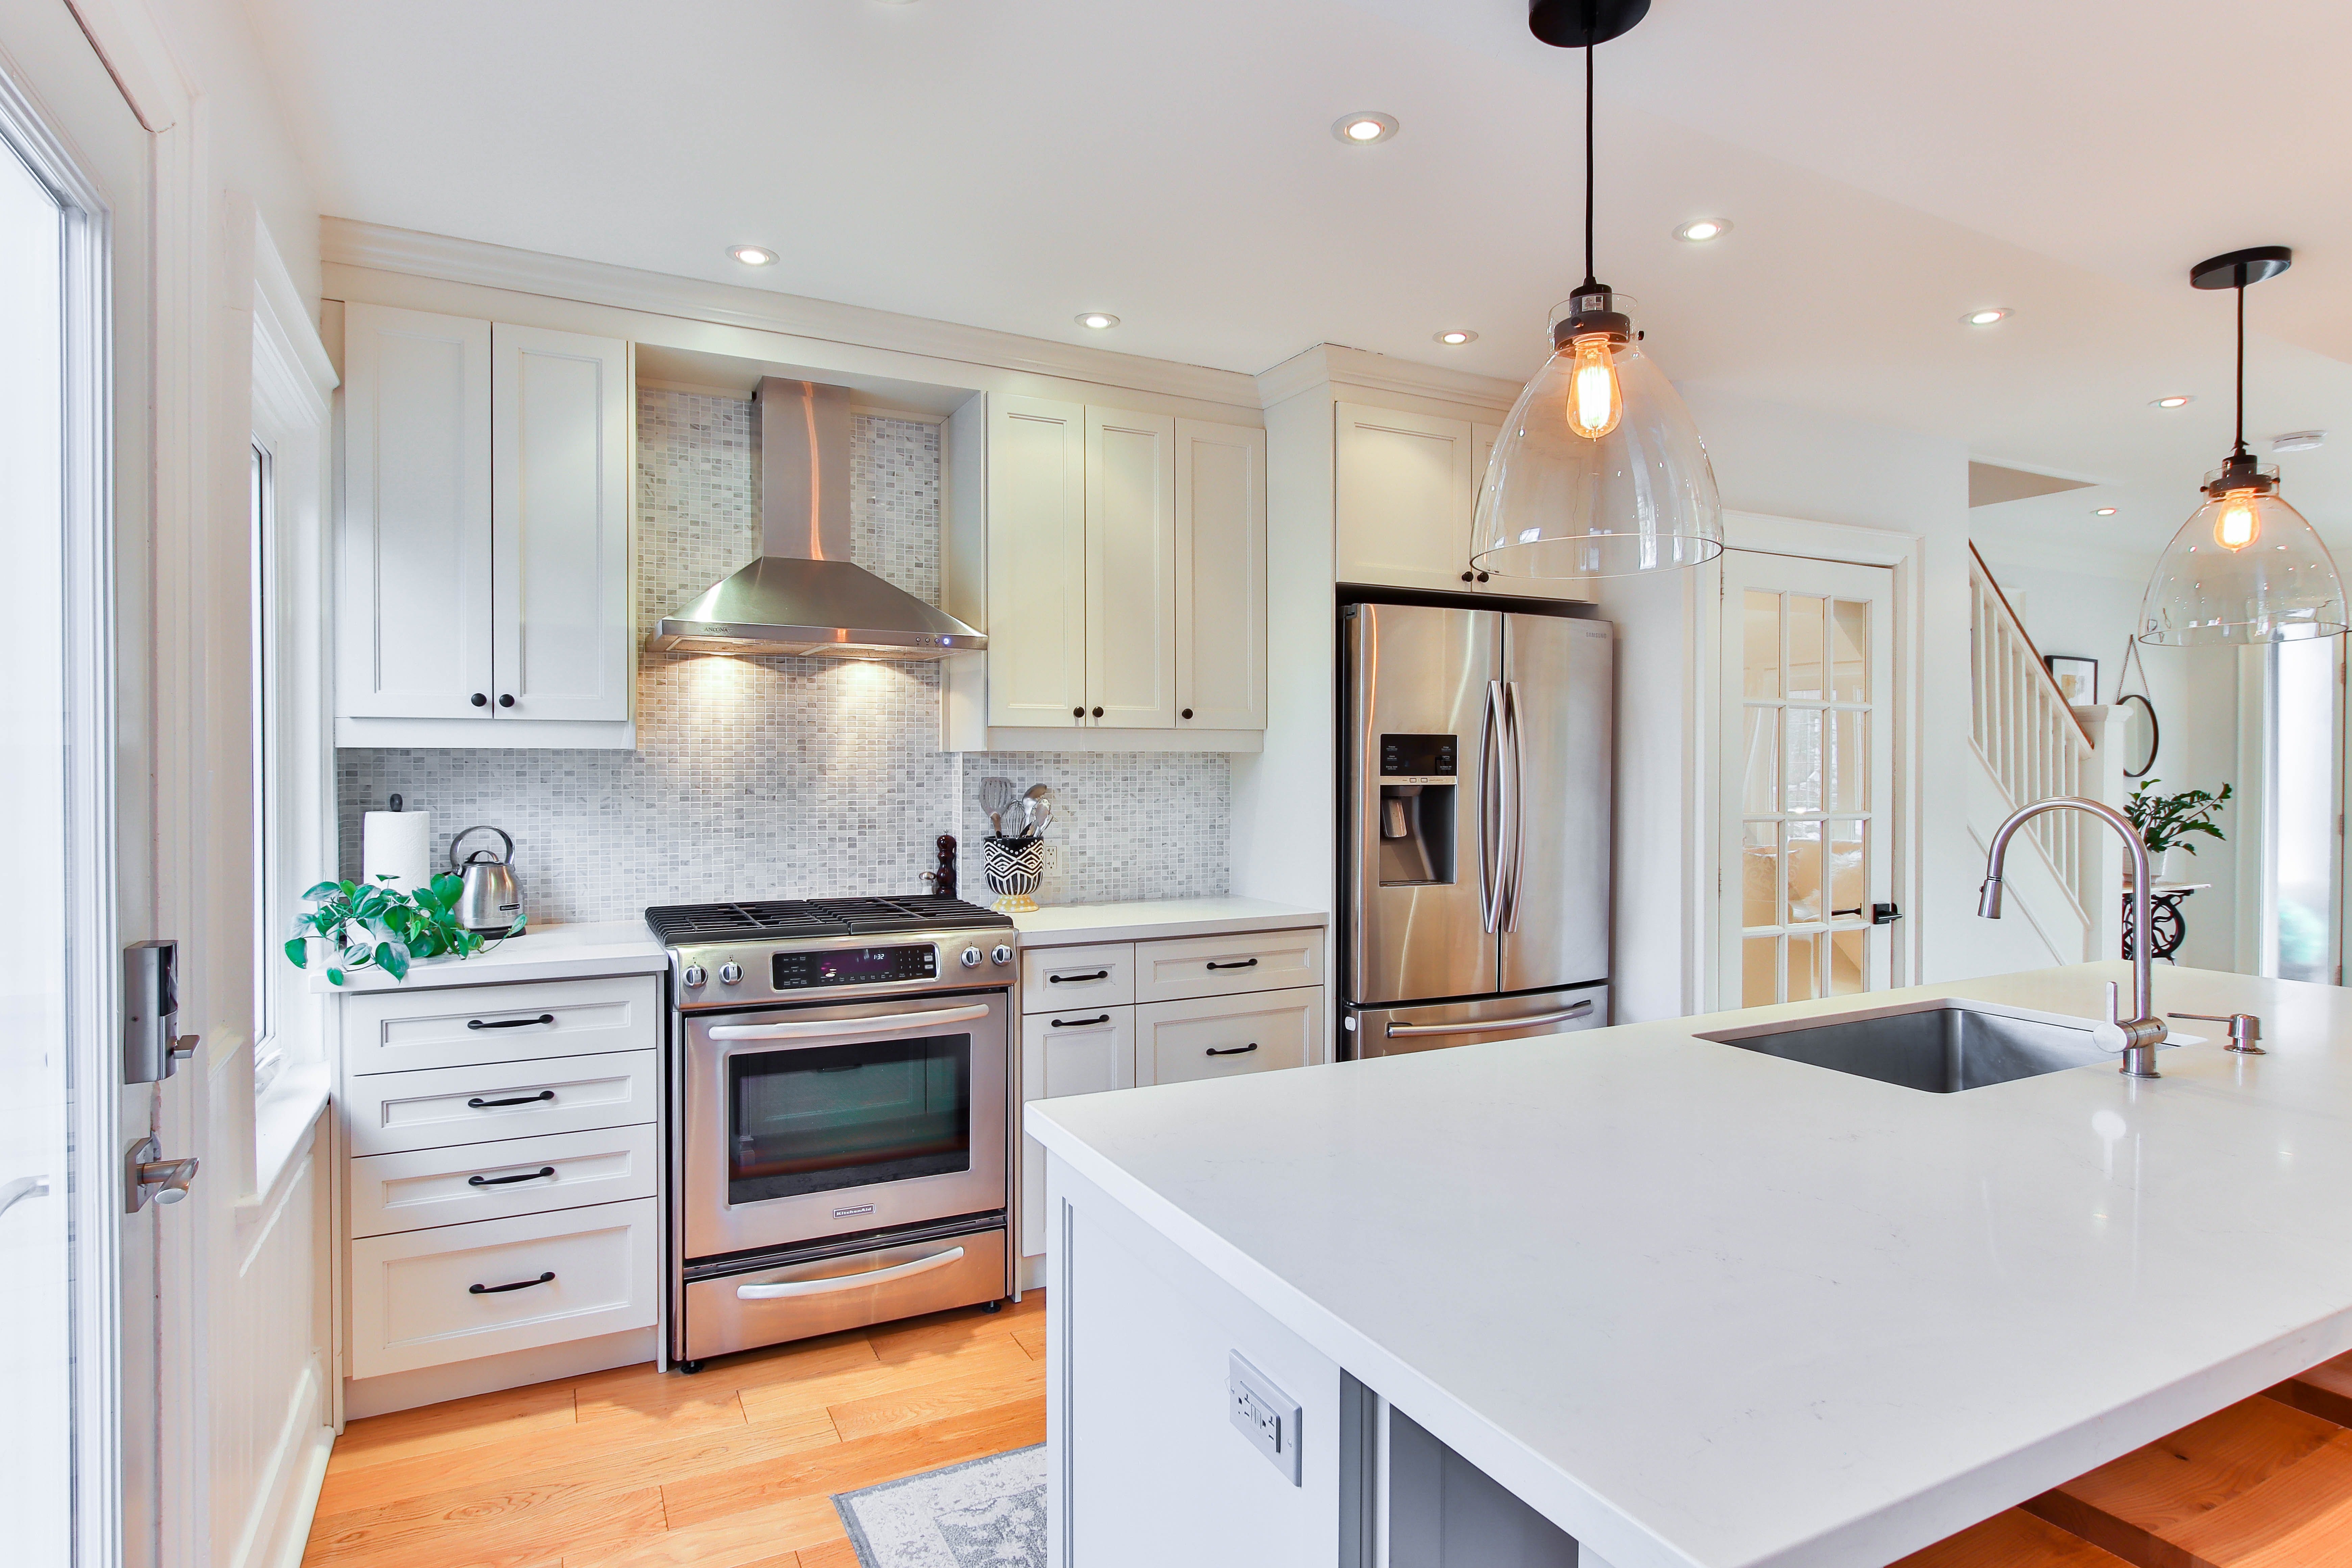 A renovated kitchen with new appliances, white countertops, and overhead lighting.